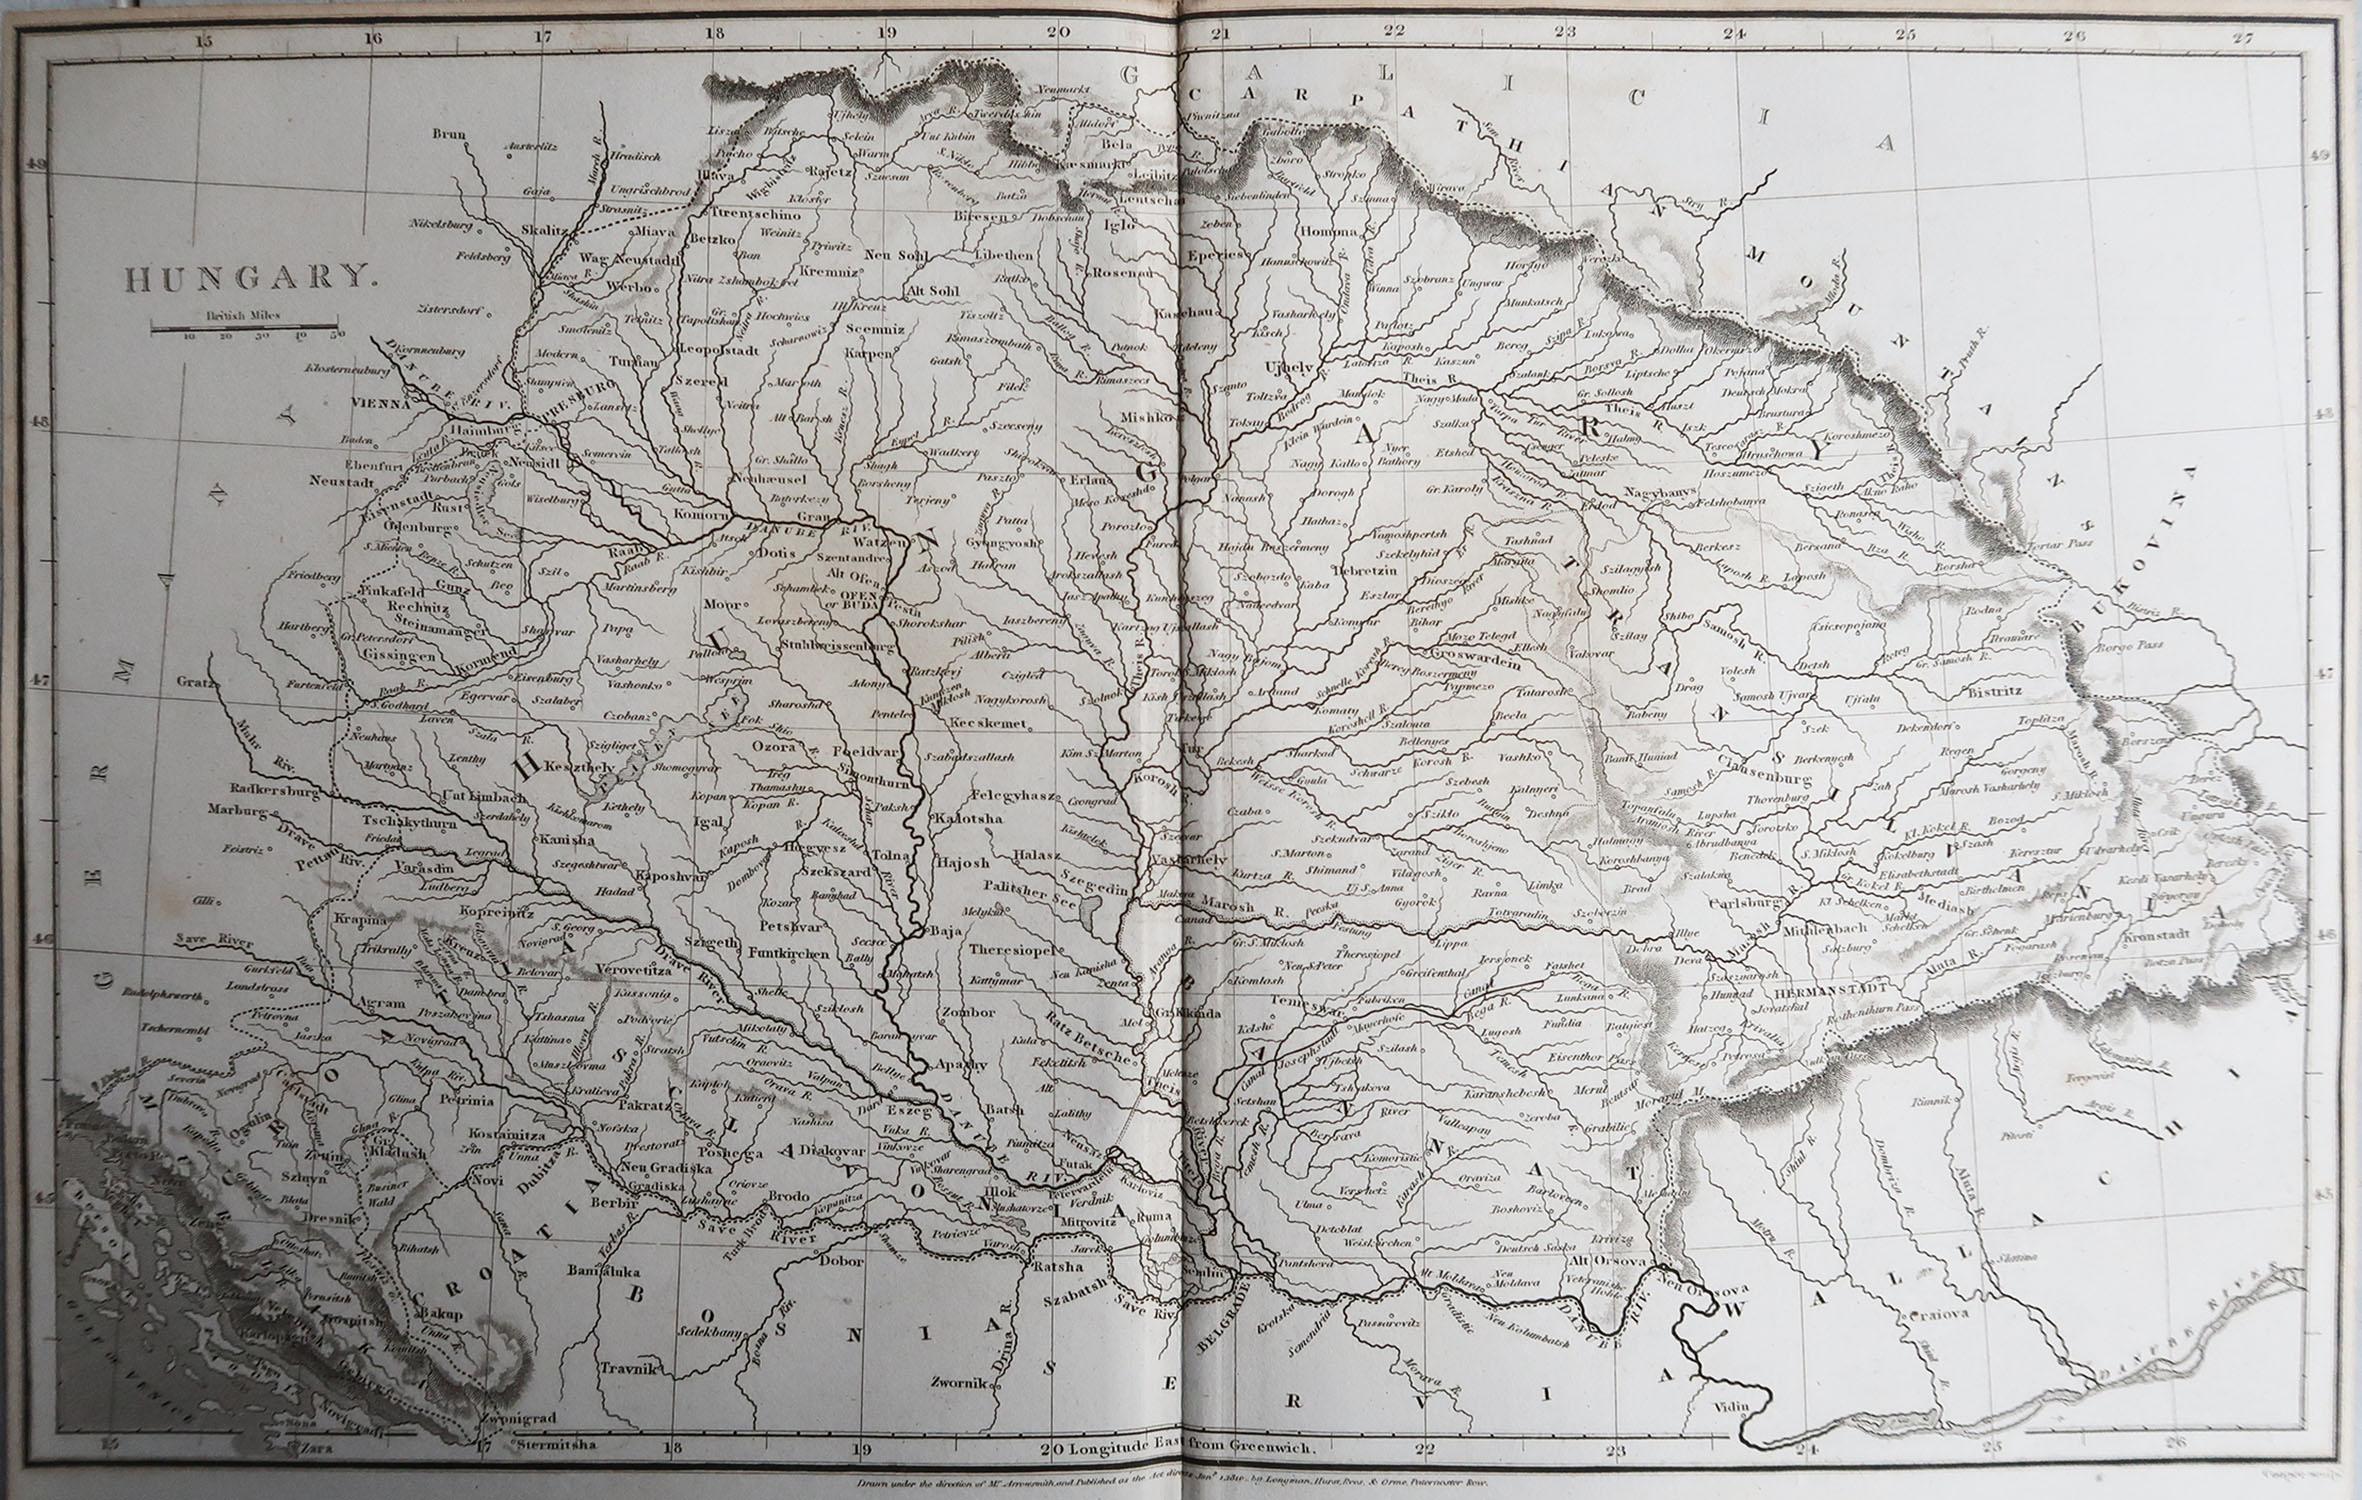 Great map of Hungary

Drawn under the direction of Arrowsmith.

Copper-plate engraving.

Published by Longman, Hurst, Rees, Orme and Brown, 1820

Unframed.